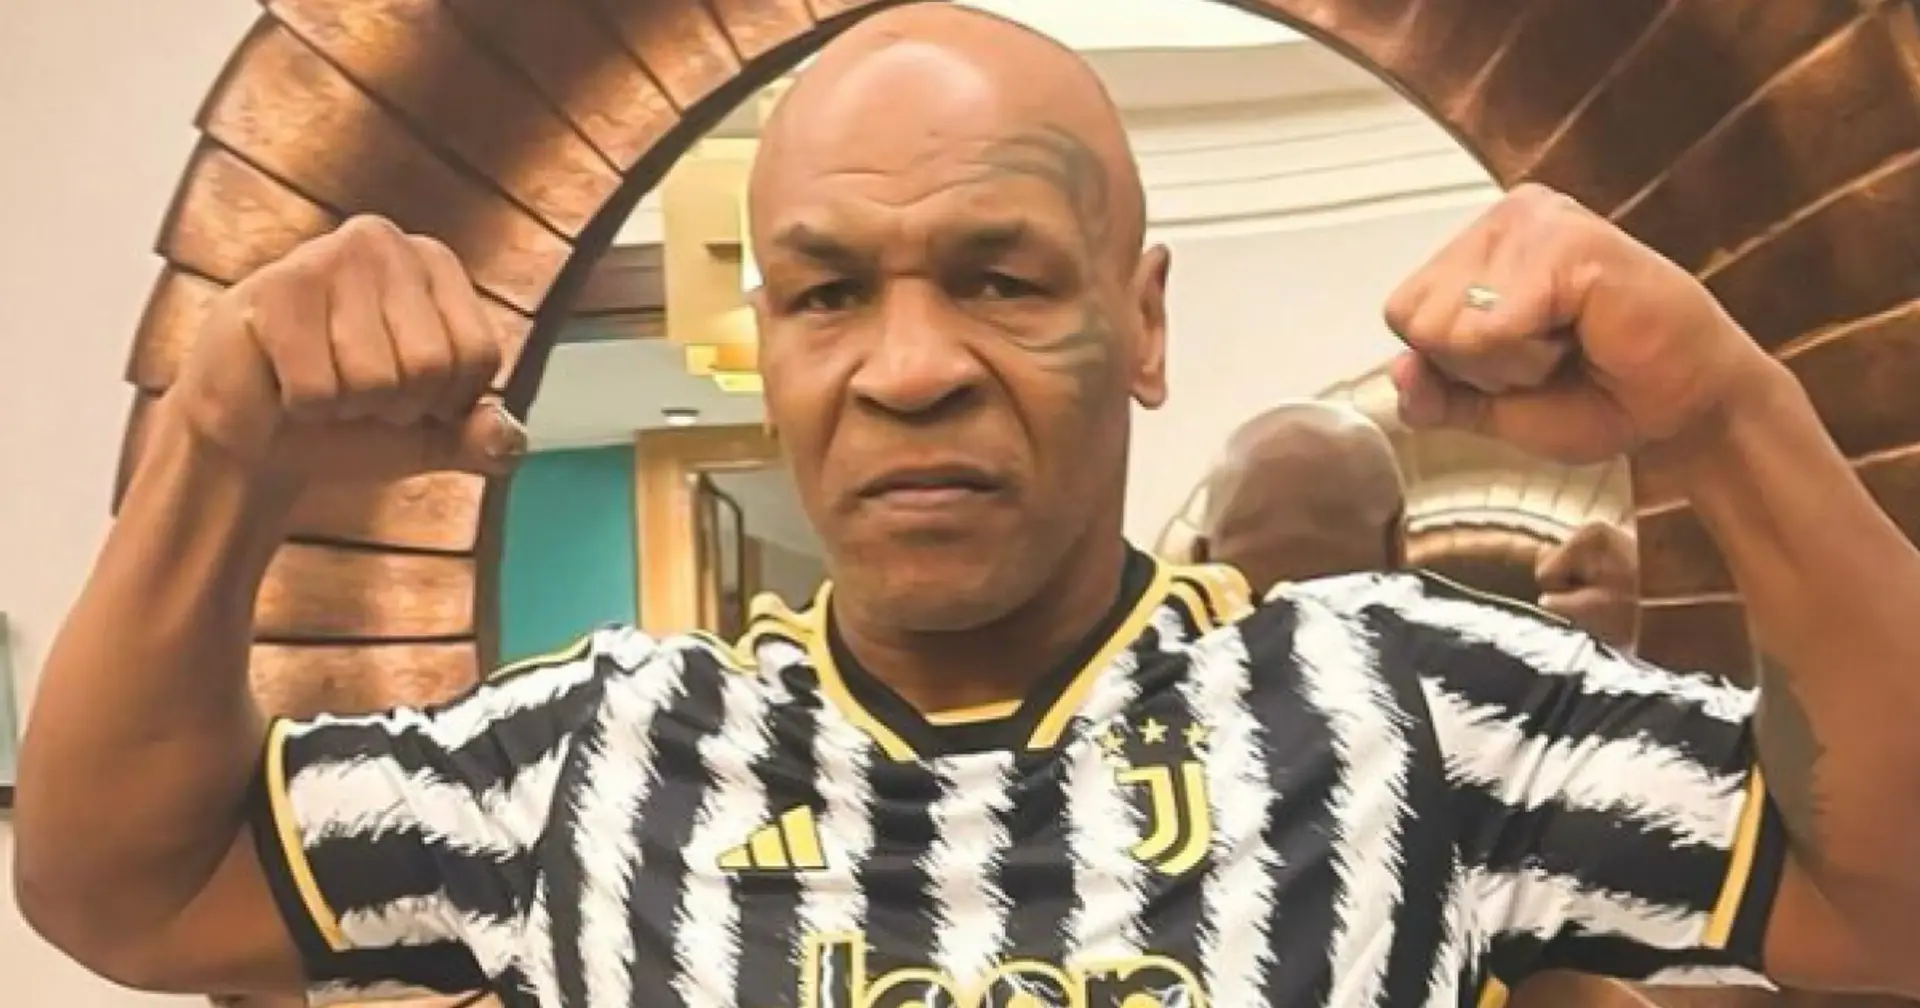   'Training gonna get a whole lot tougher': Mike Tyson poses in Juventus shirt